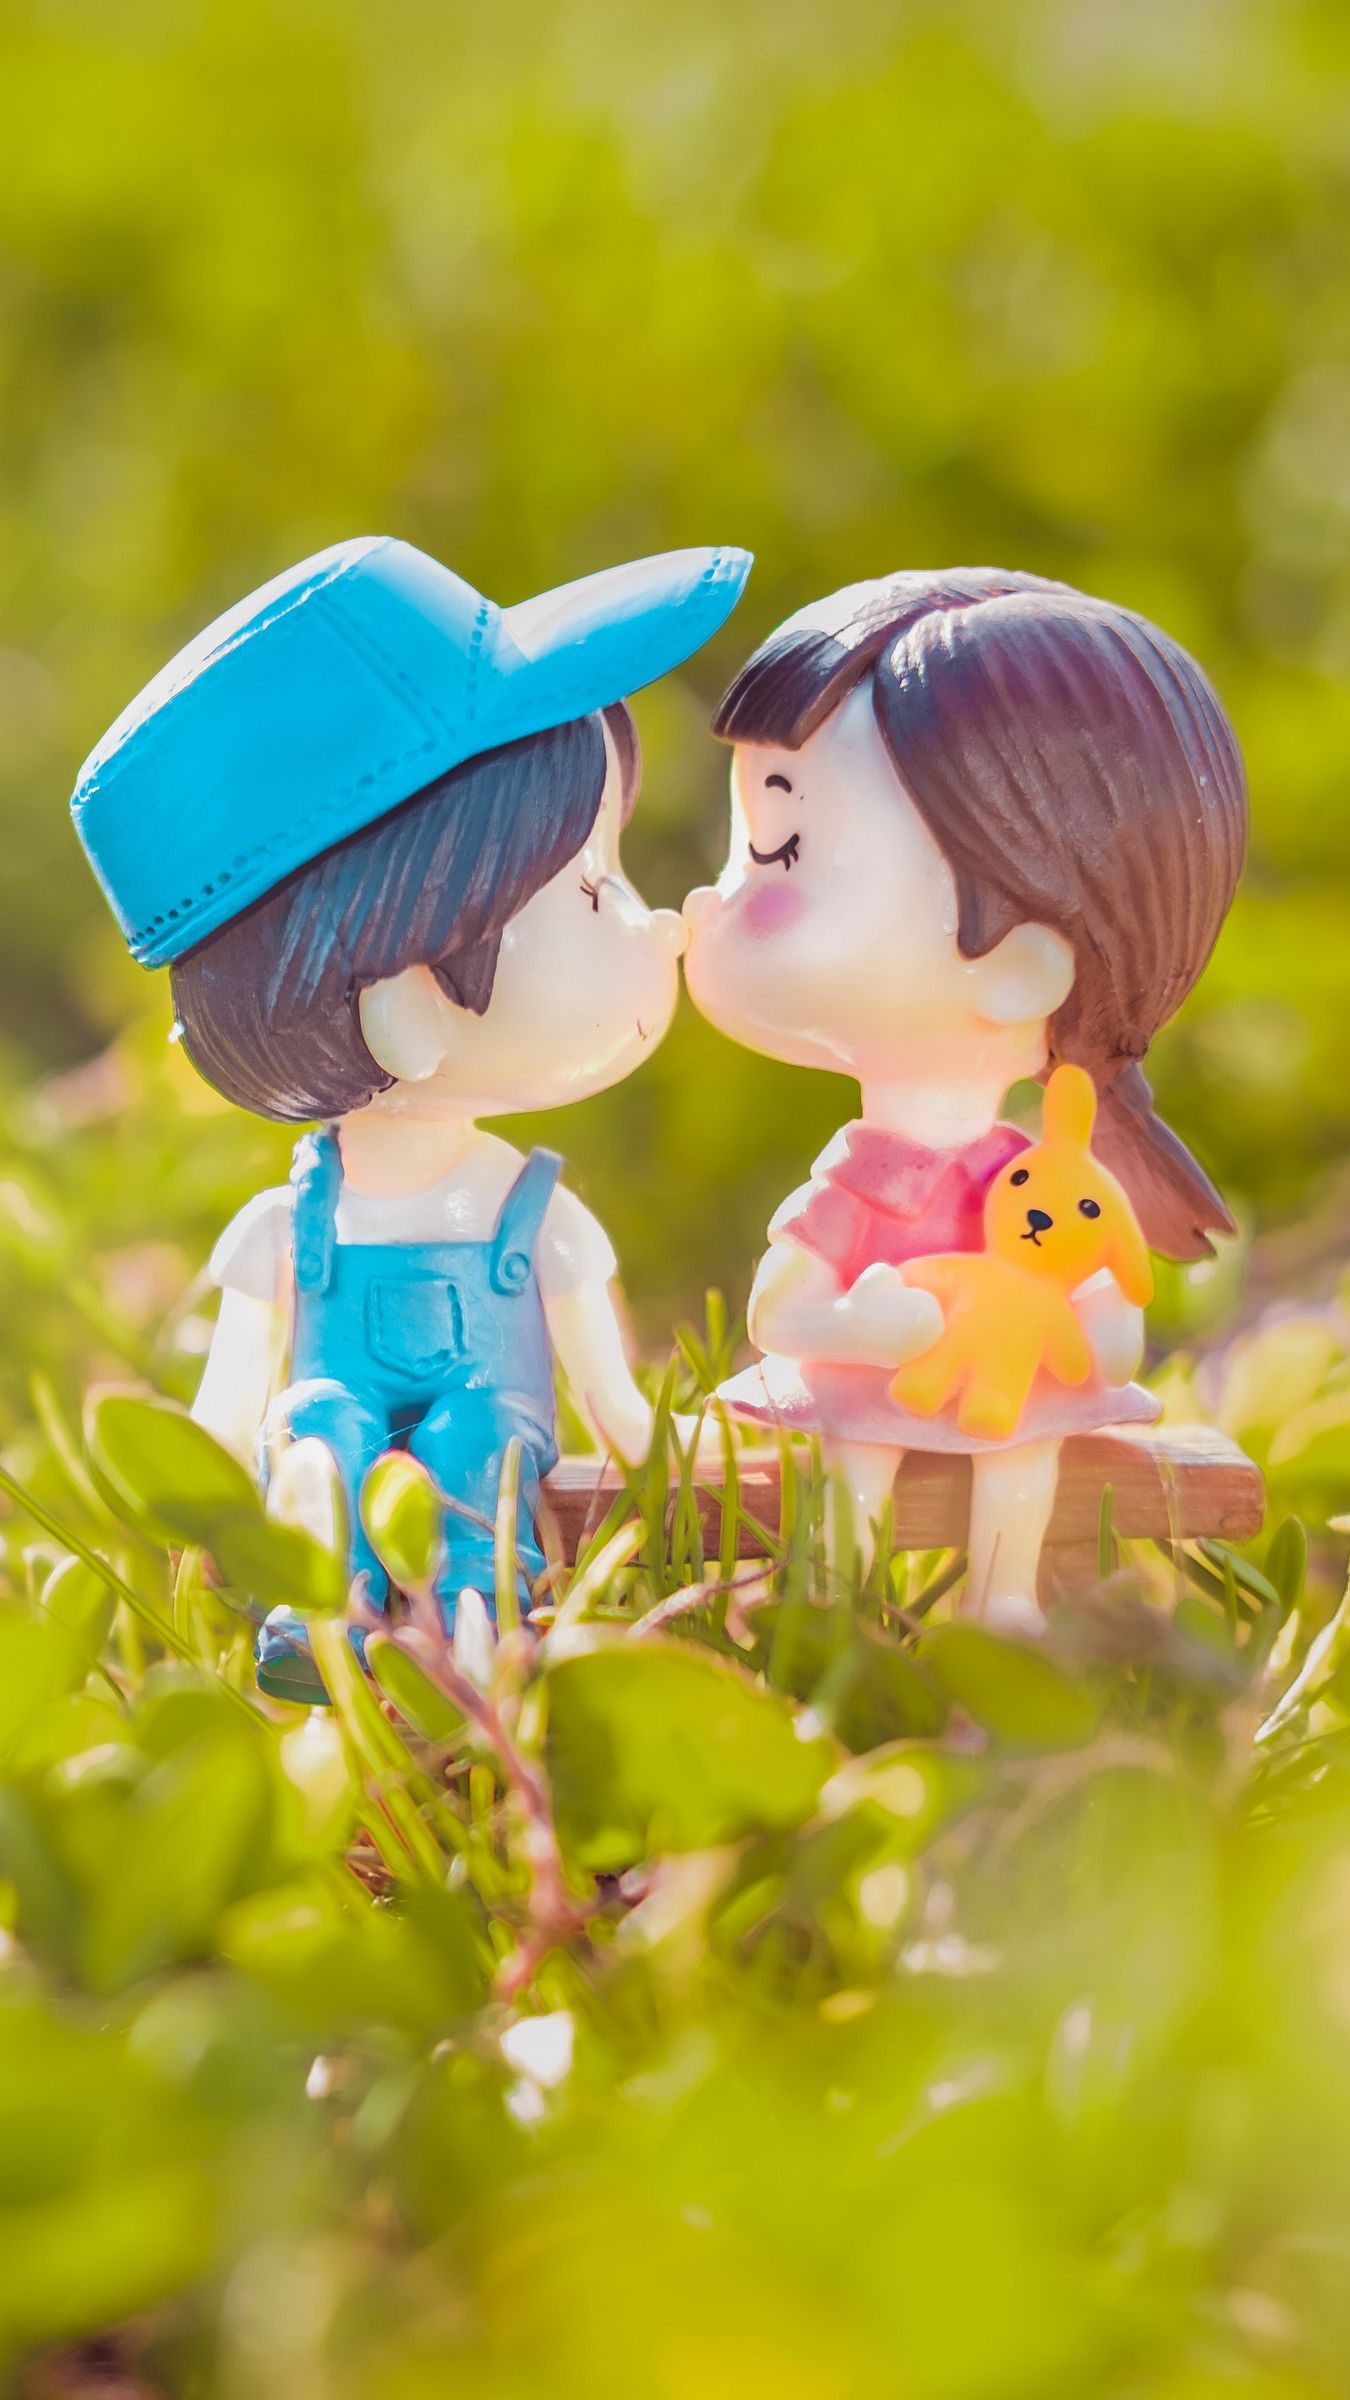 Download wallpaper 1350x2400 boy, girl, kiss, love, figurines iphone  8+/7+/6s+/6+ for parallax hd background